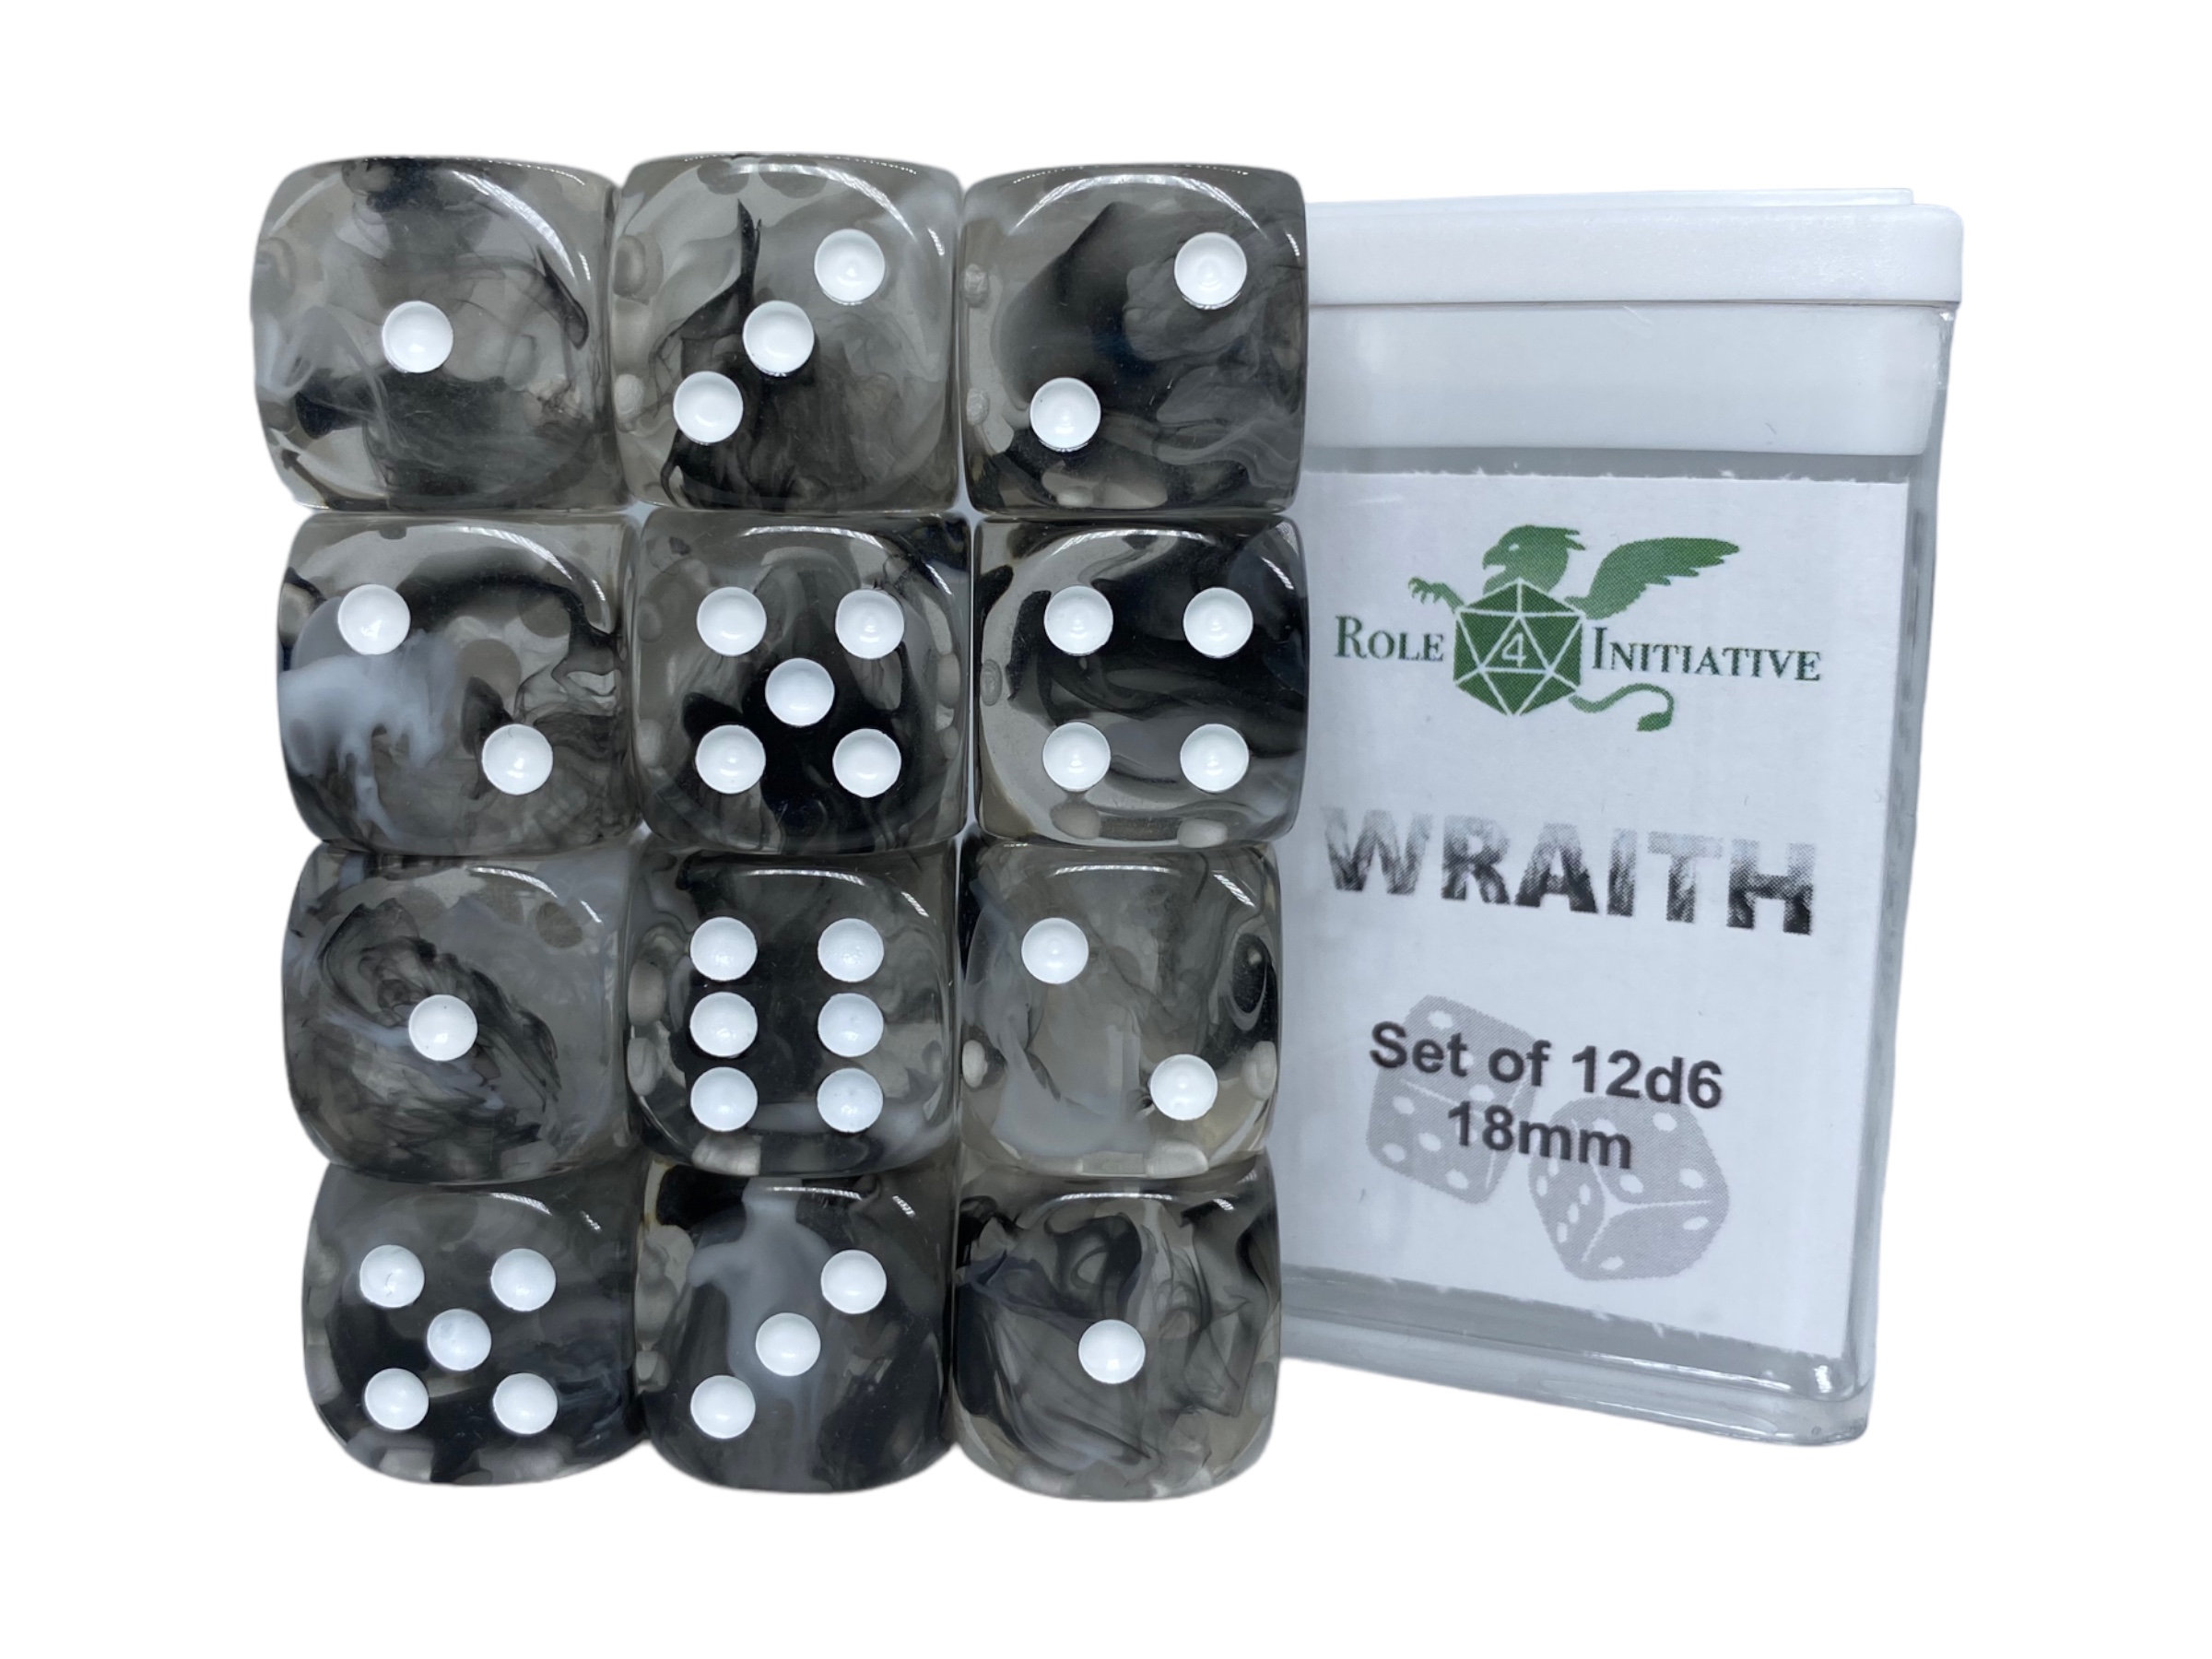 Role 4 Initiative: 12 D6 Pips Dice Set: Diffusion Wraith 18MM 